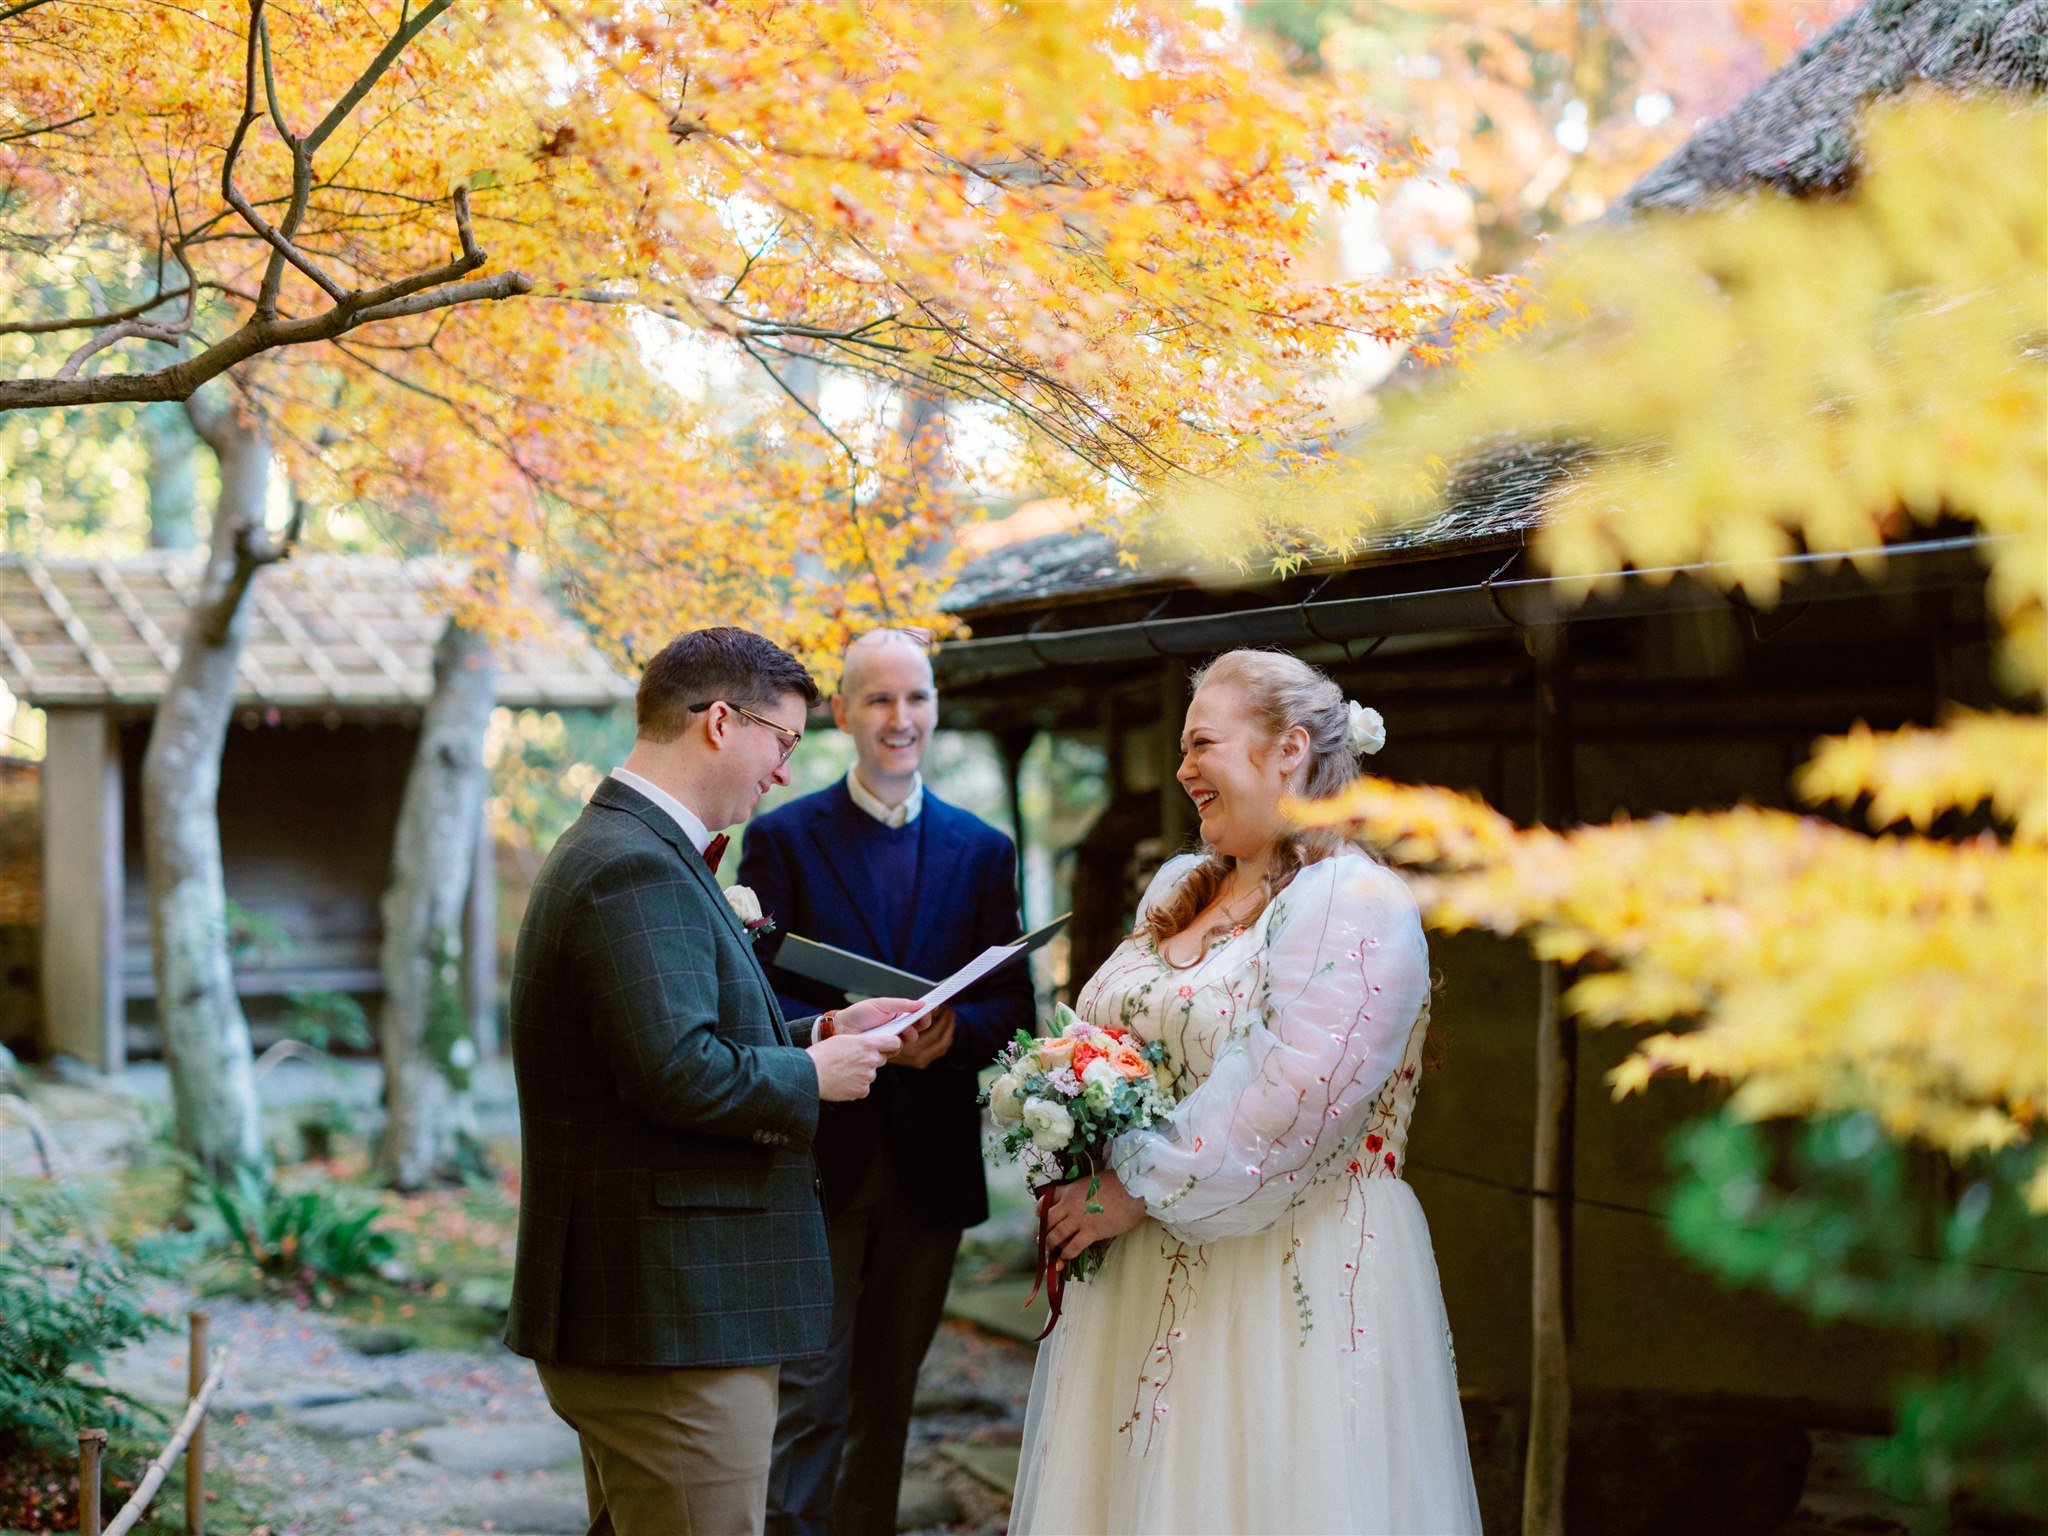 Intimate Elopement in a traditional Japanese Garden in Nara, Japan